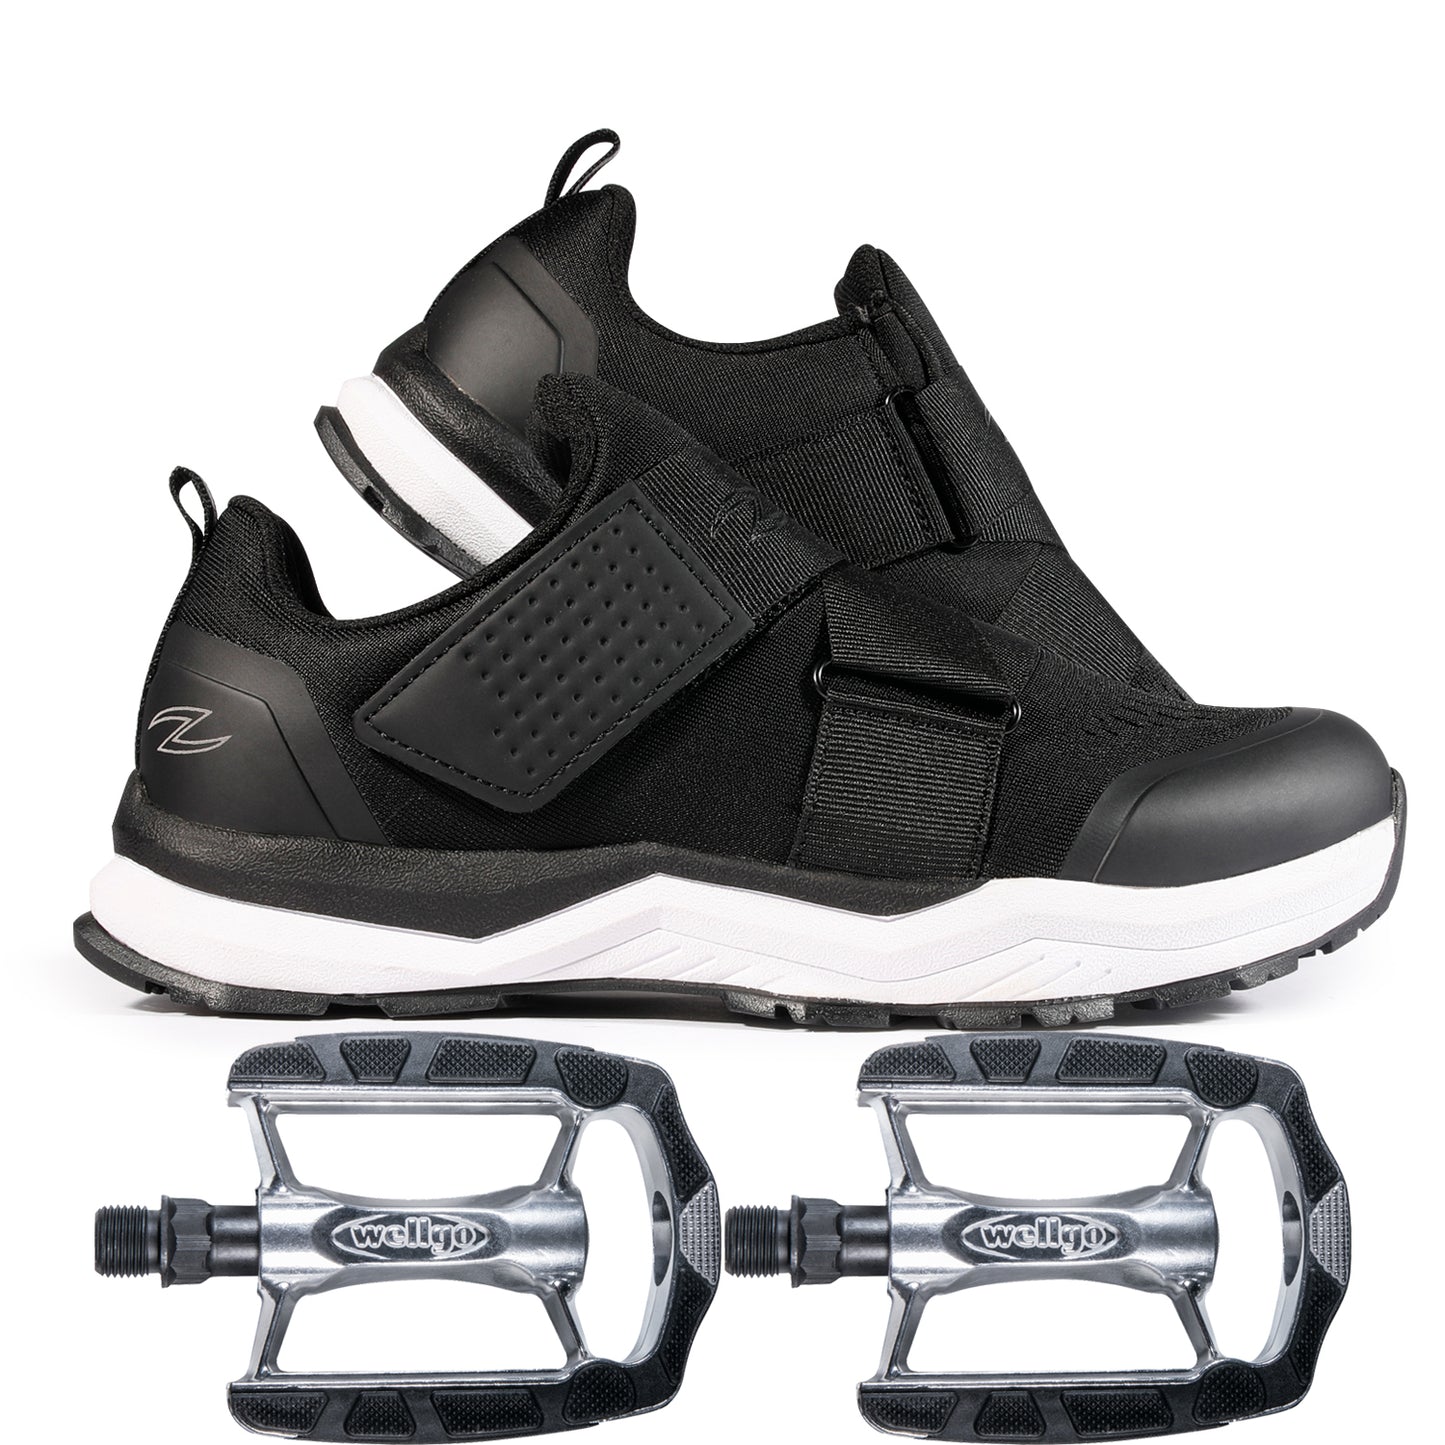 Zol Salon Indoor Cycling Shoe is Clipless  with Platform Pedals - Zol Cycling